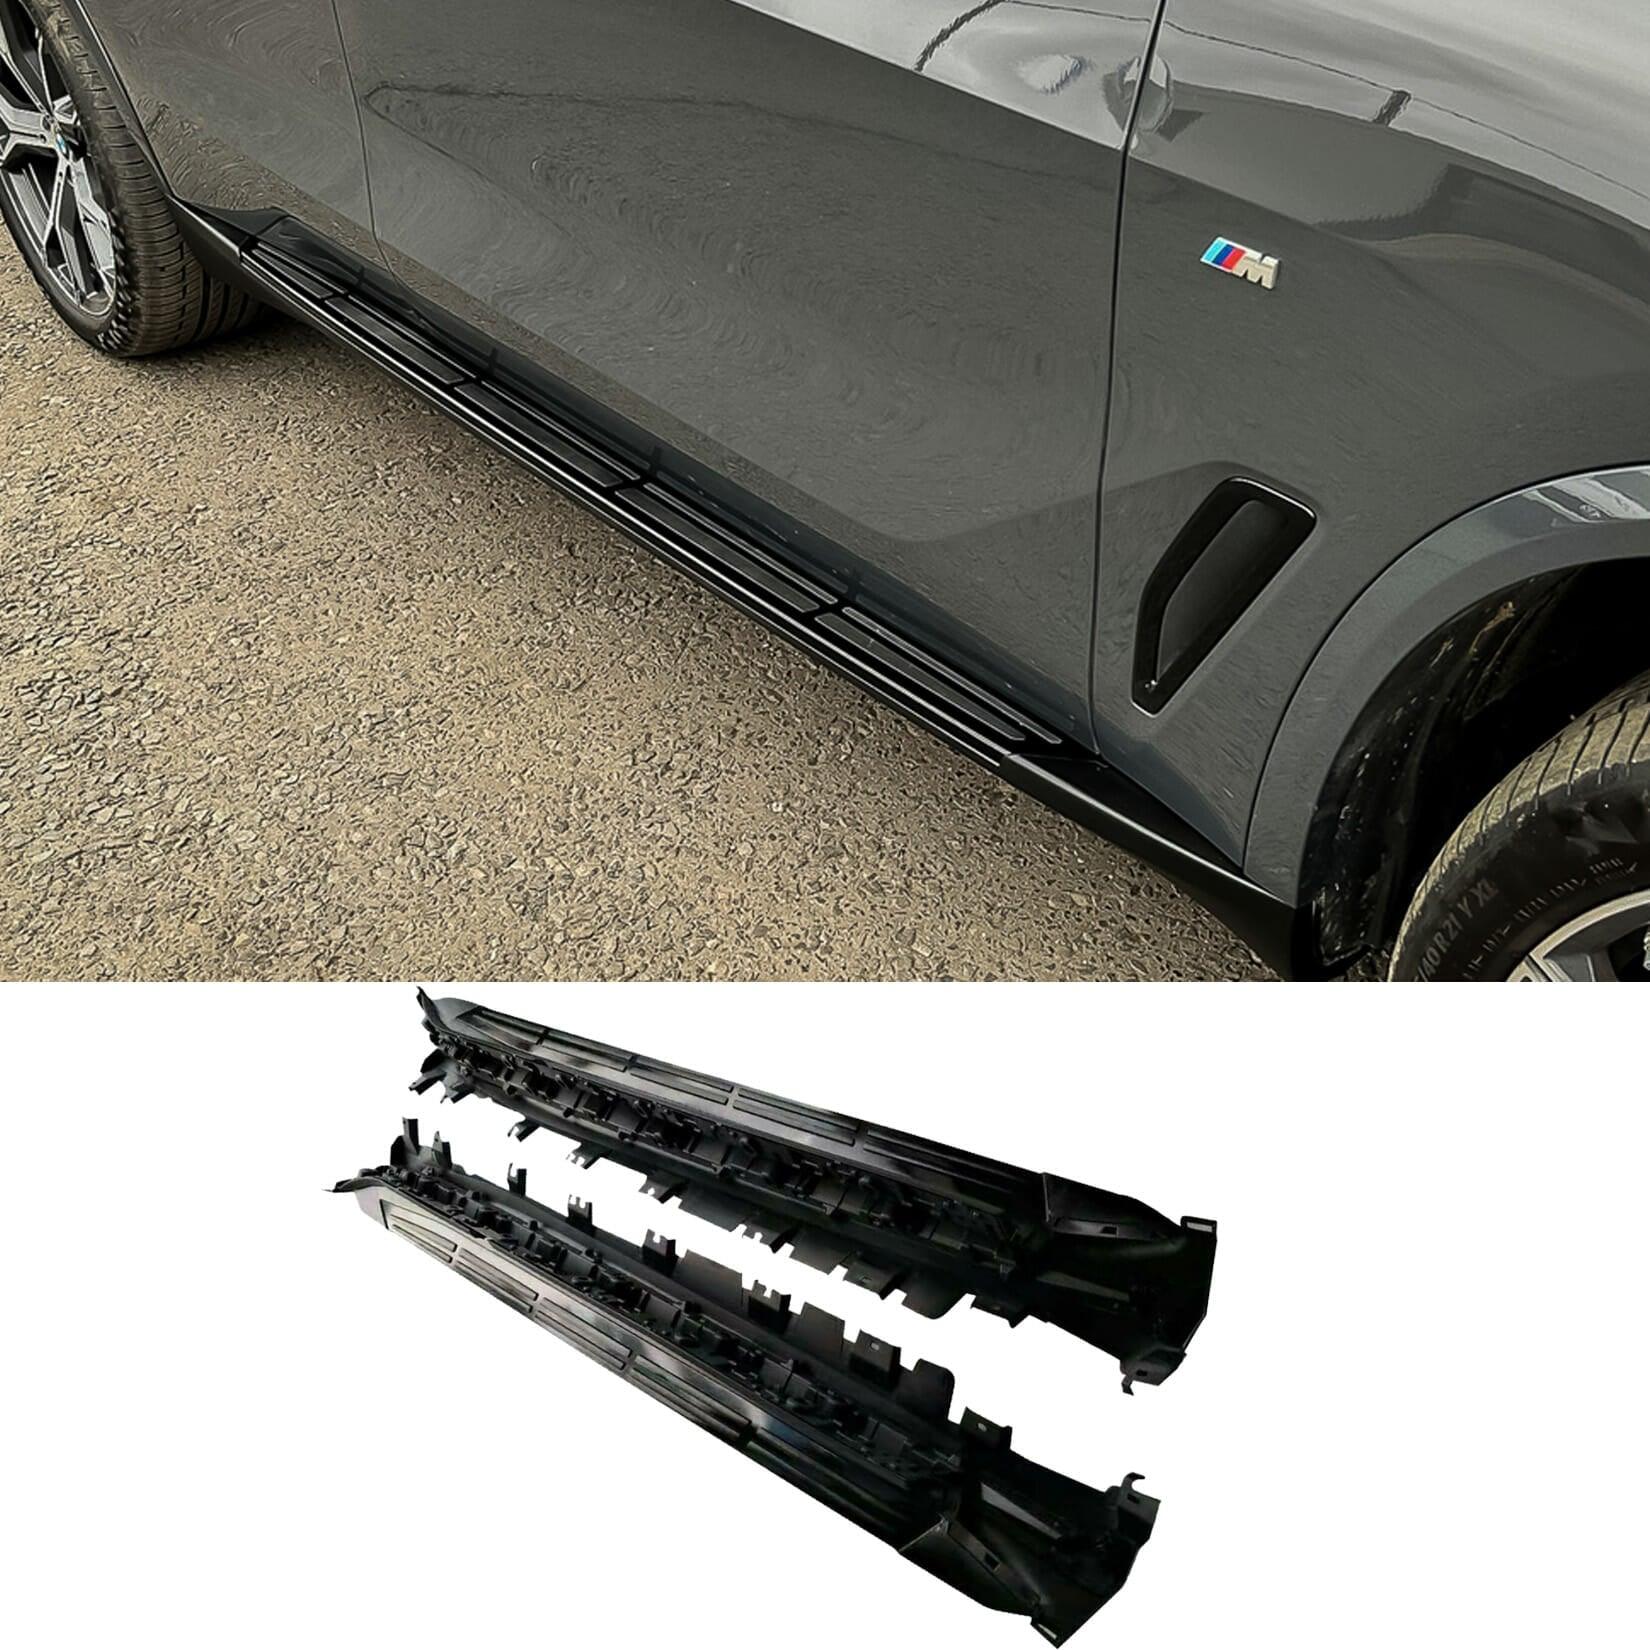 BMW X5 G05 2019 ON OEM STYLE RUNNING BOARDS - SIDE STEP - PAIR - IN BLACK - Storm Xccessories2